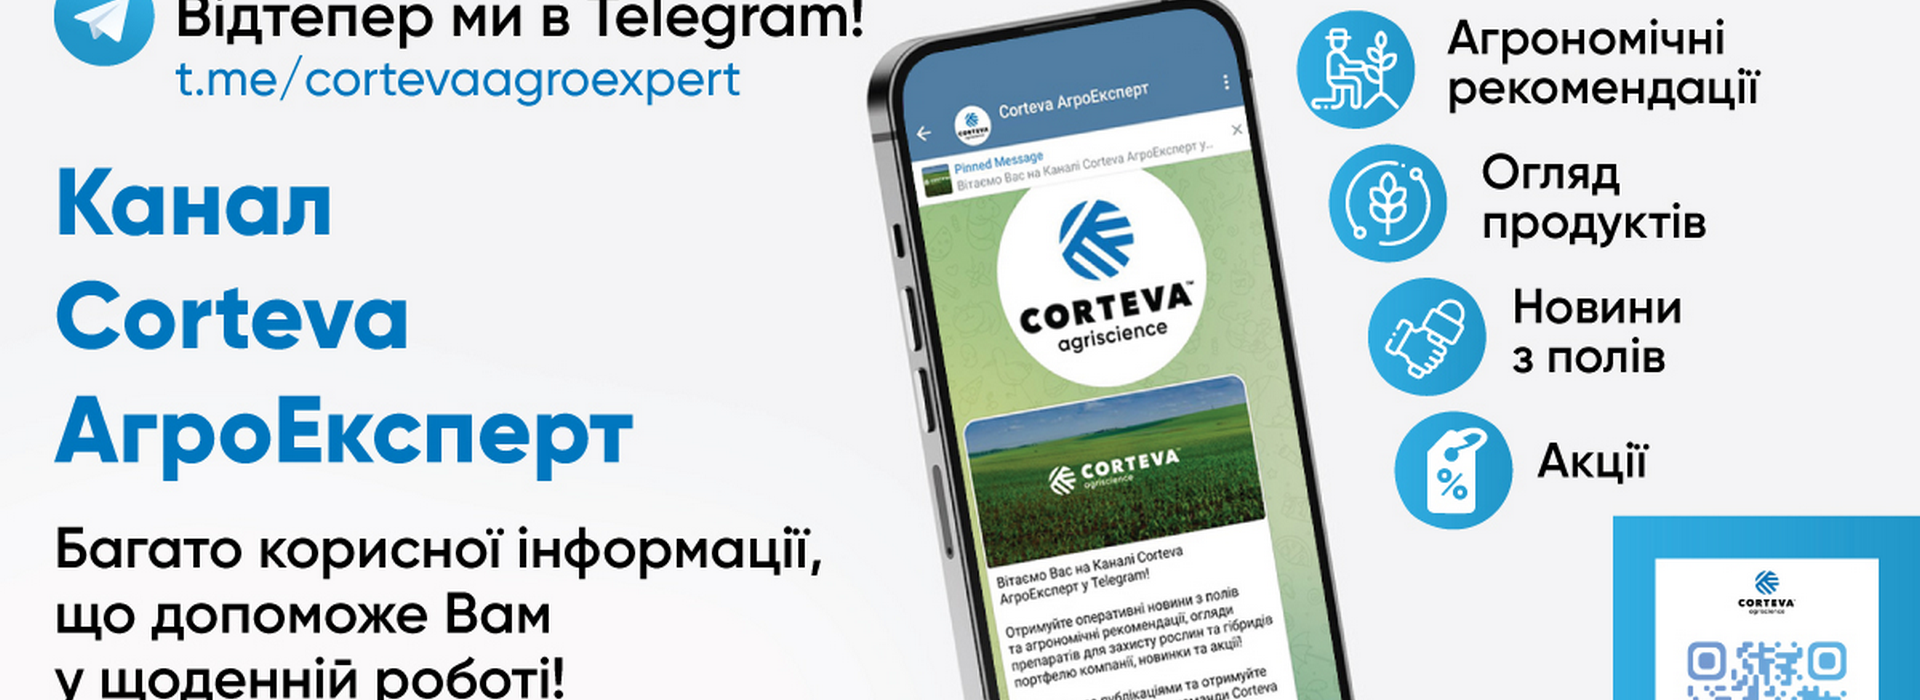 Corteva Agriscience Is Introducing New Online Tools to Better Support Farmers